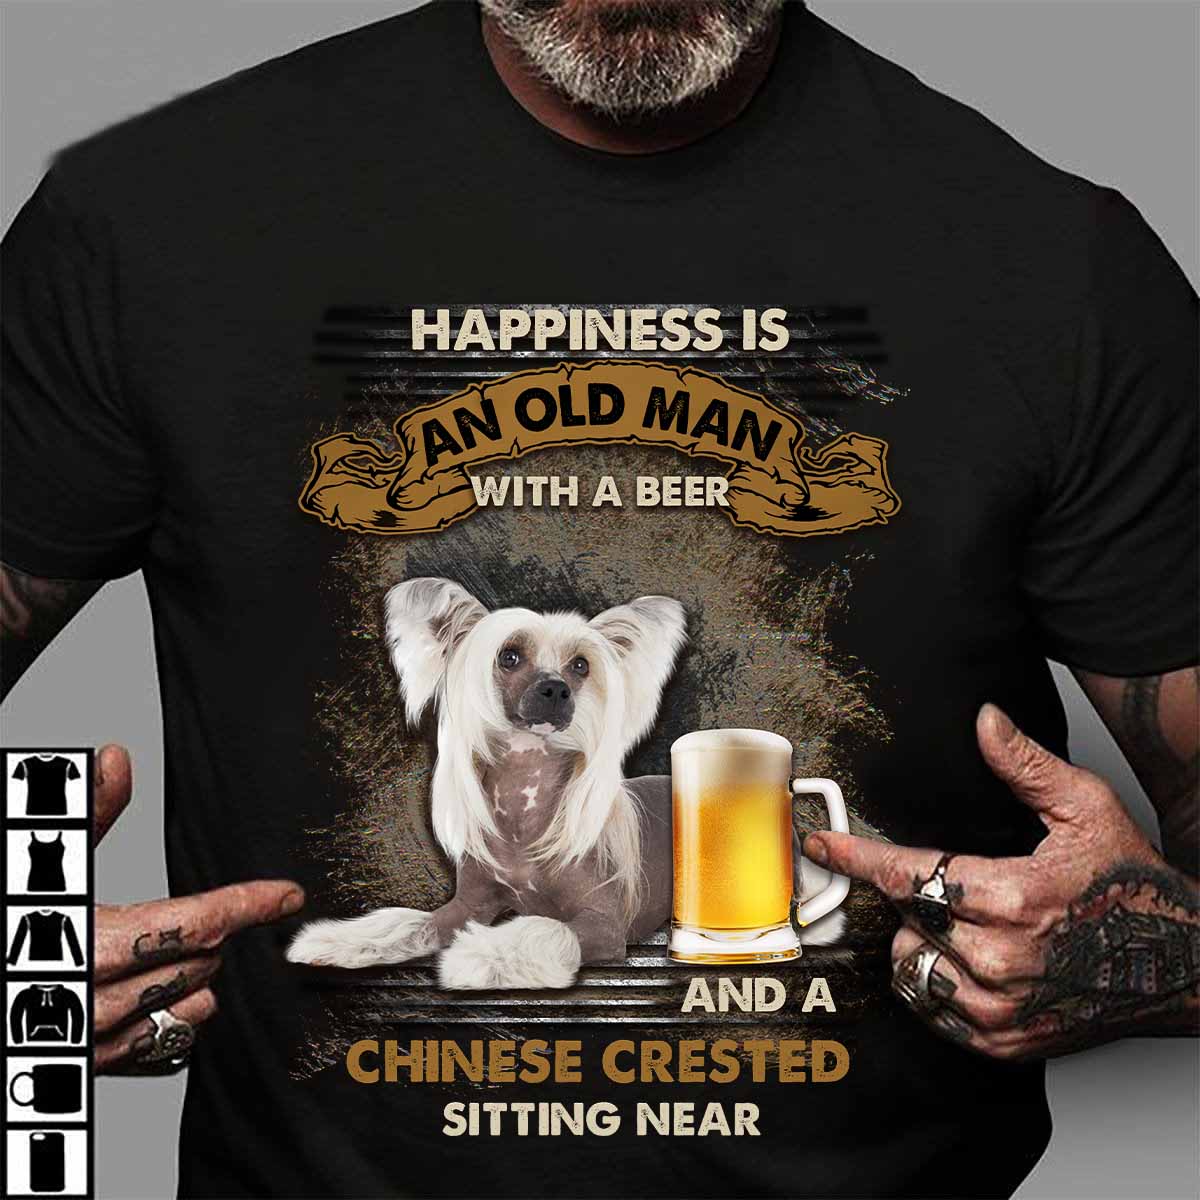 Chinese Crested Dog, Beer Lover - Happiness is an old man with a beer and a Chinese Crested sitting near